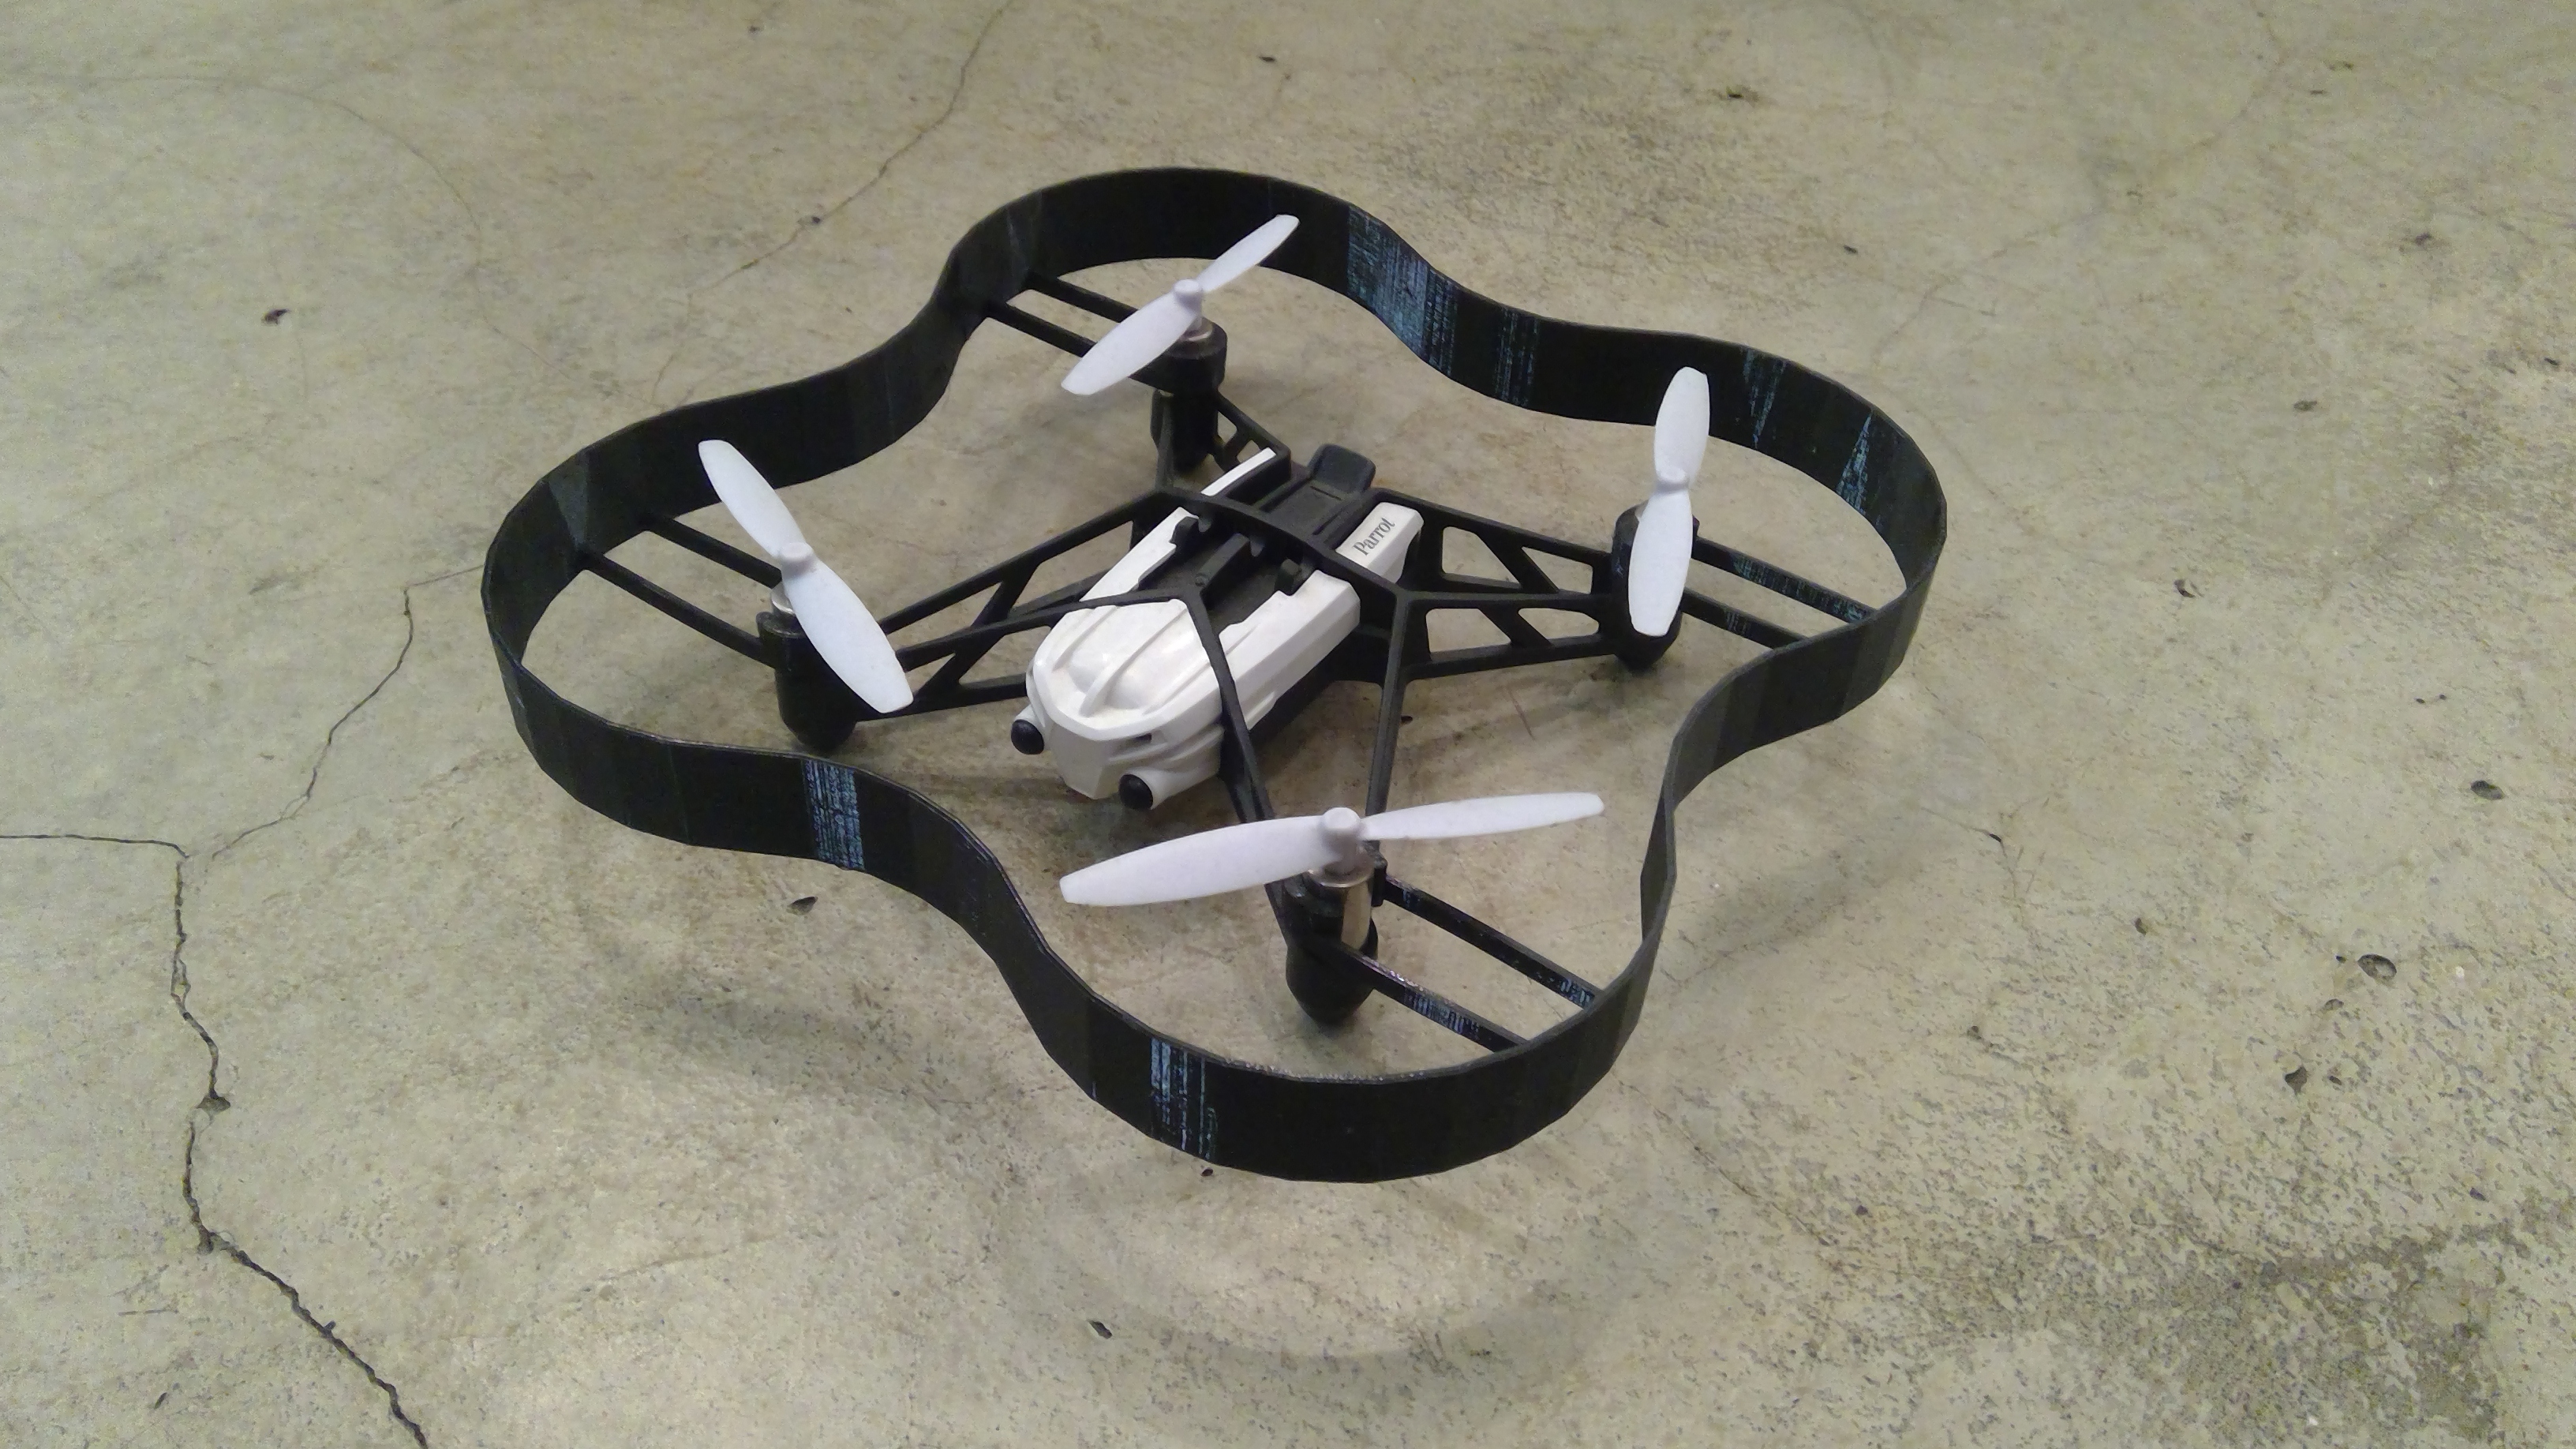 Another Parrot minidrone bumper